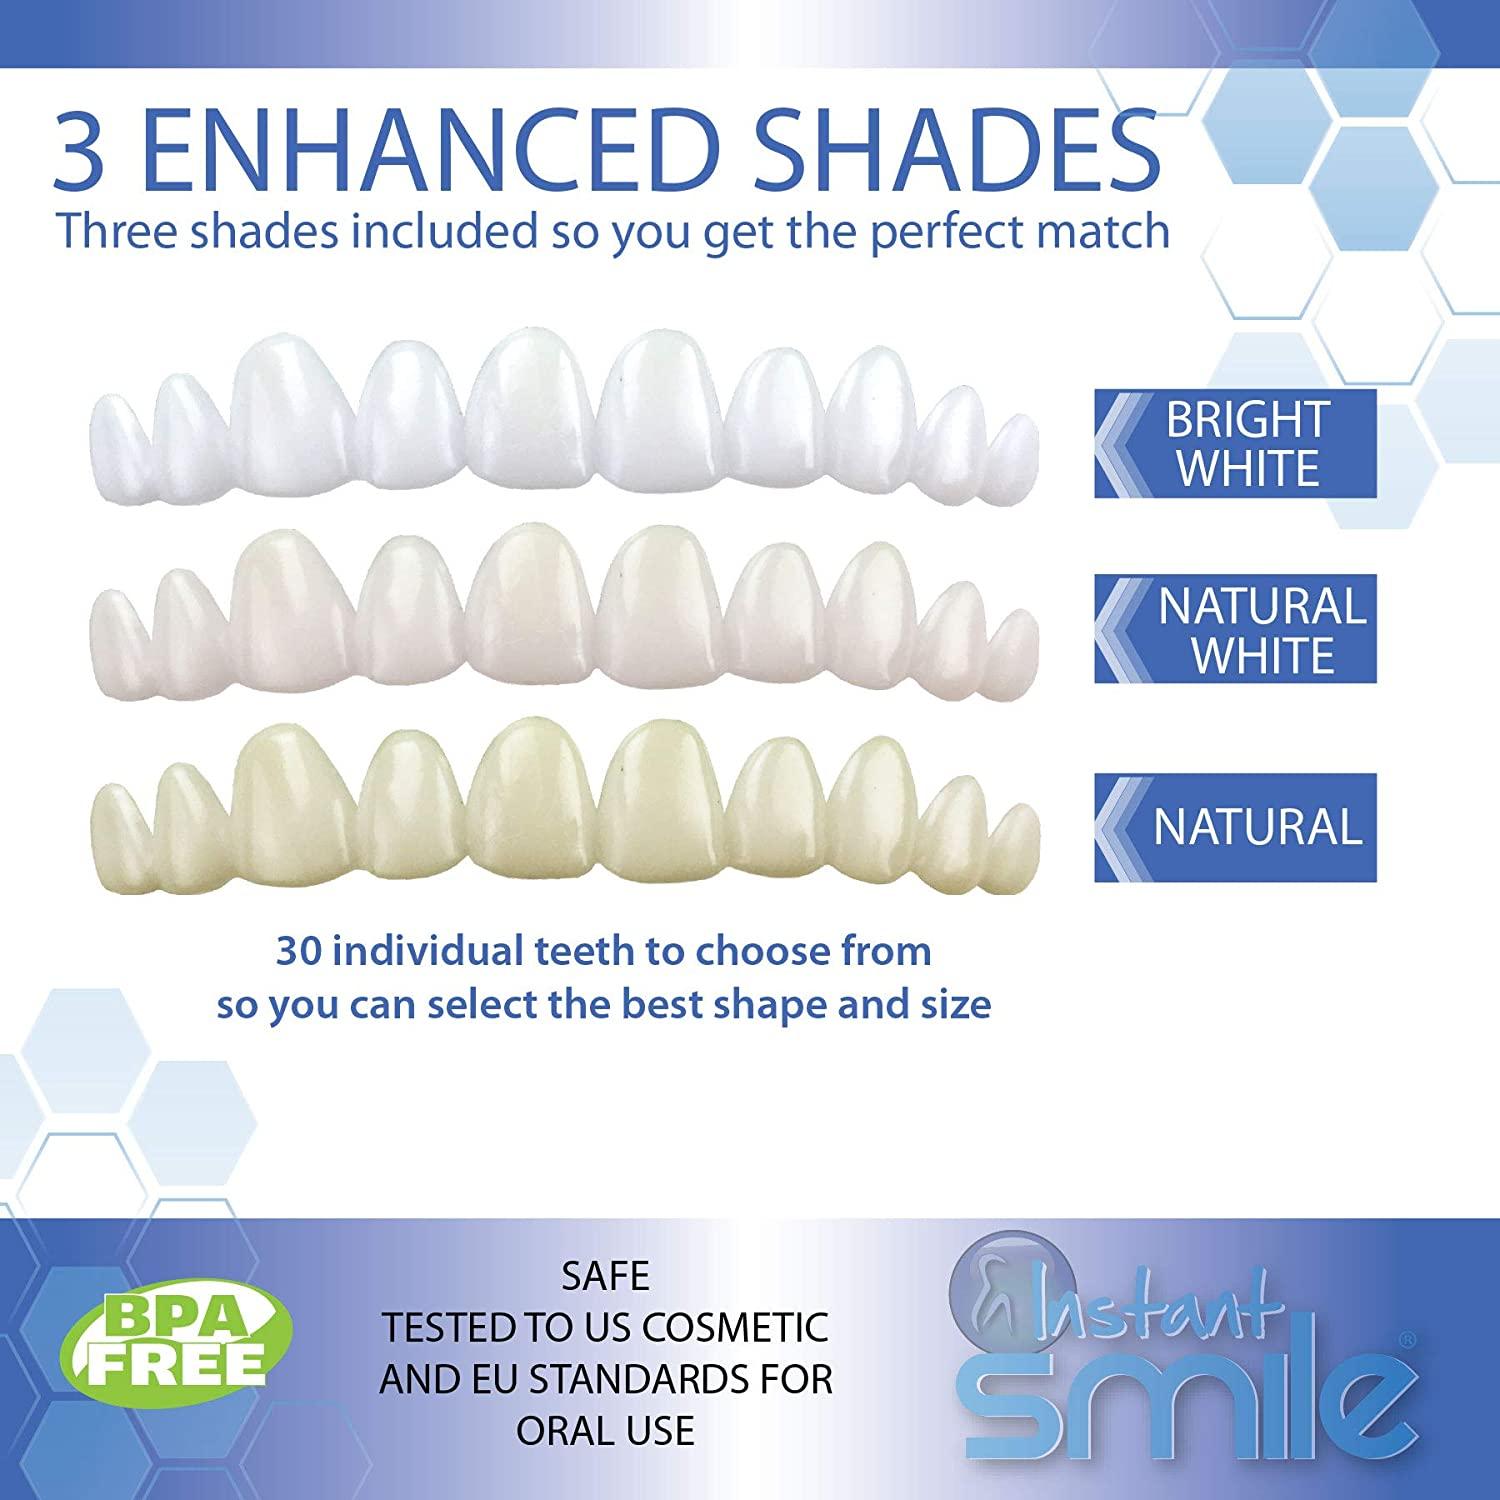 Instant Smile MULTISHADE Patented Temporary Tooth Repair Kit. A